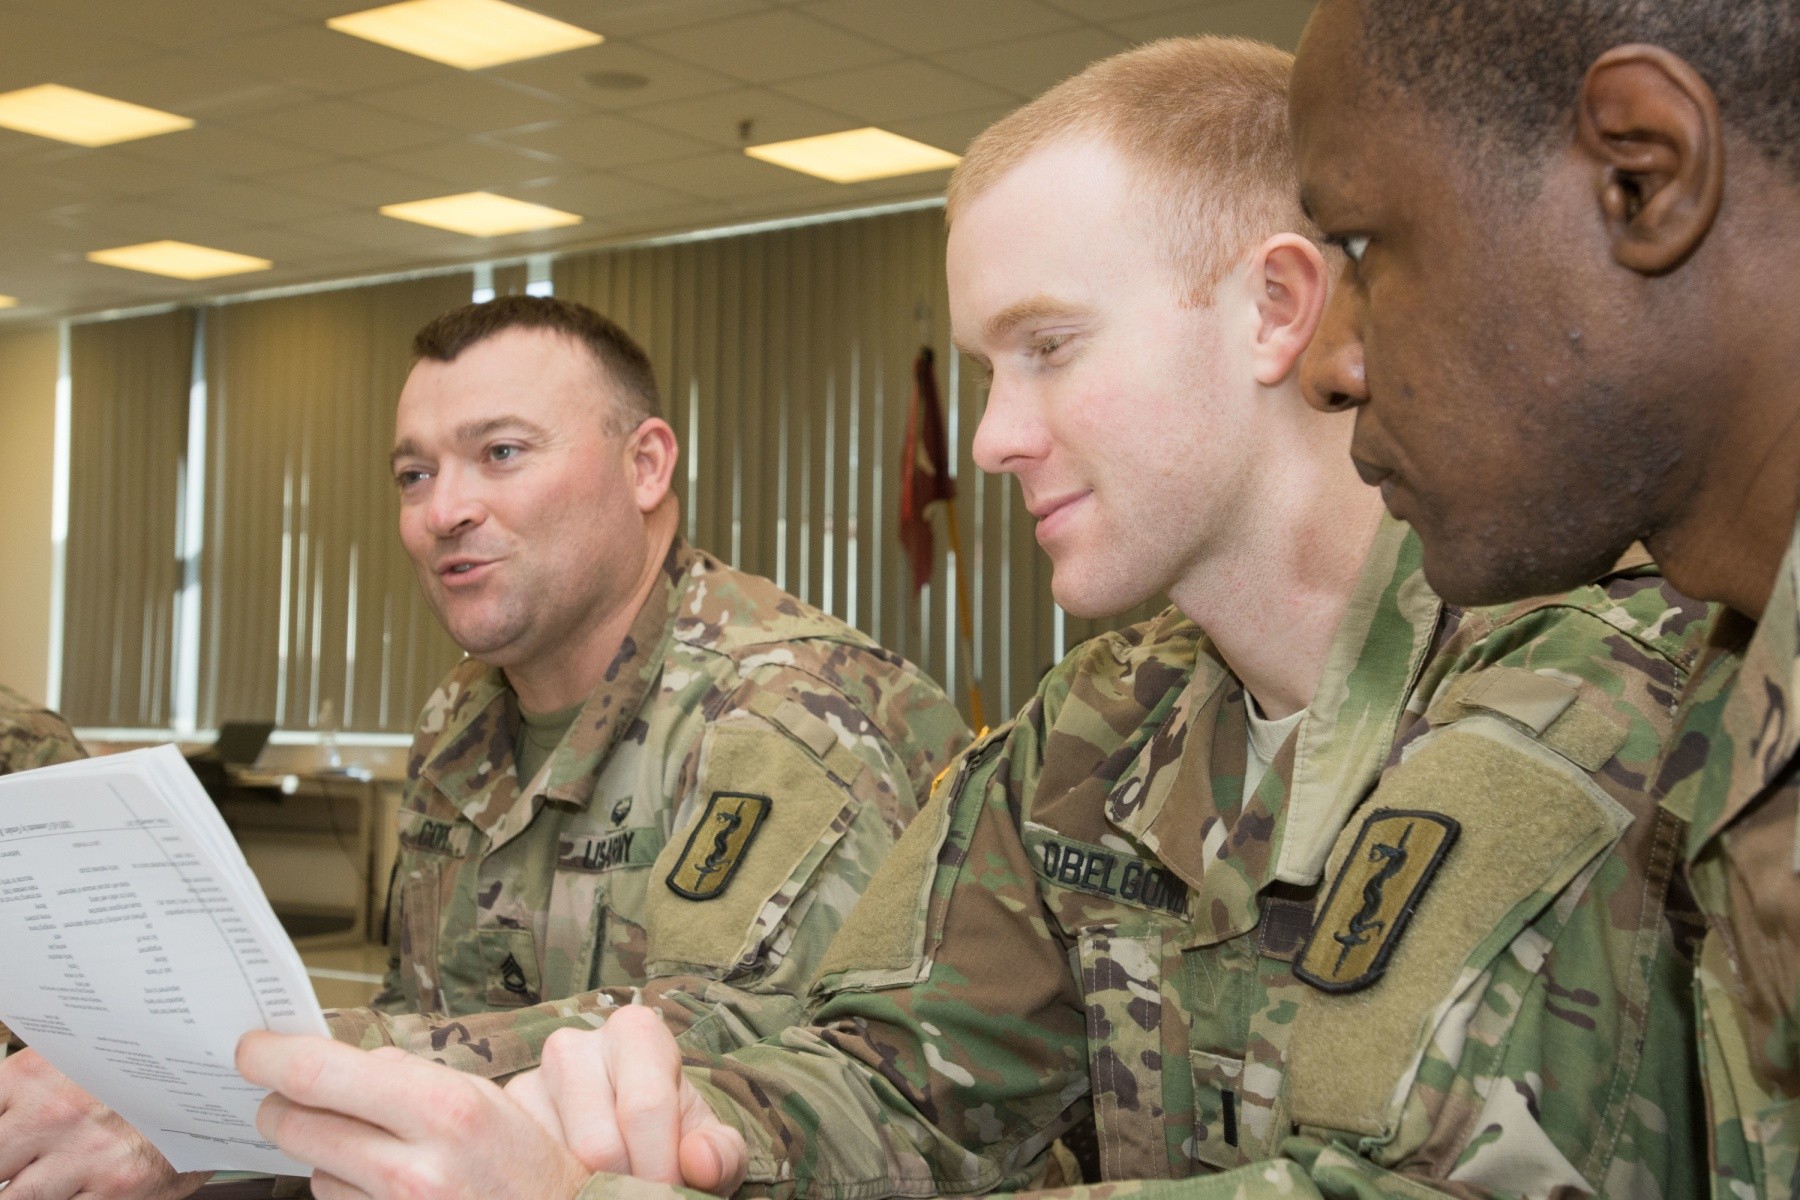 Medics organize, attend Stress Training | Article | The United States Army